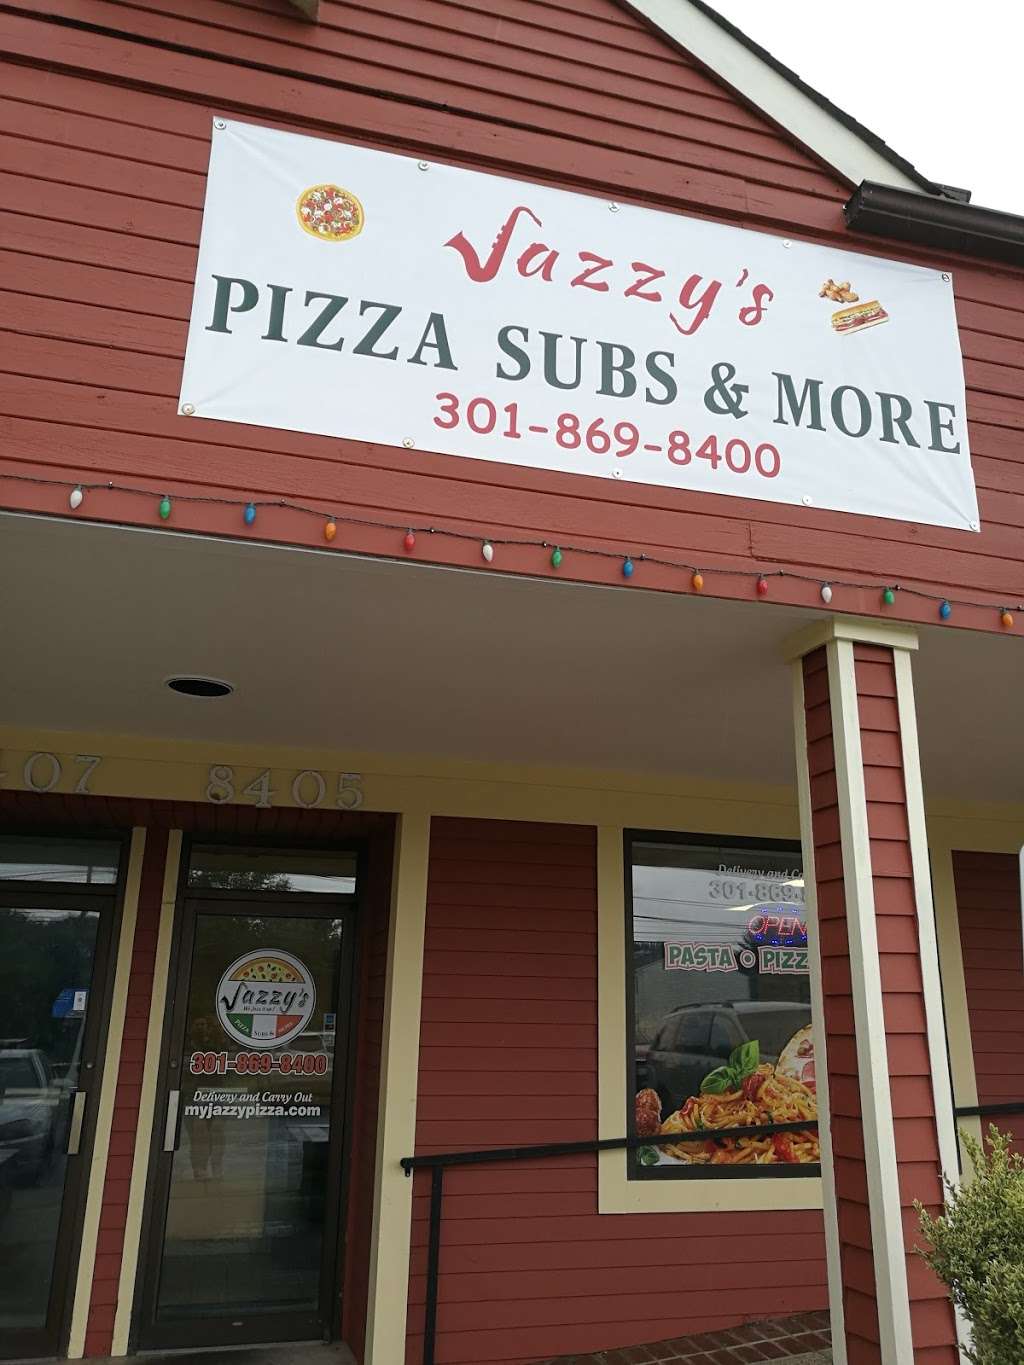 Jazzys Pizza, Subs & More | 8405 Snouffer School Rd, Gaithersburg, MD 20879 | Phone: (301) 869-8400